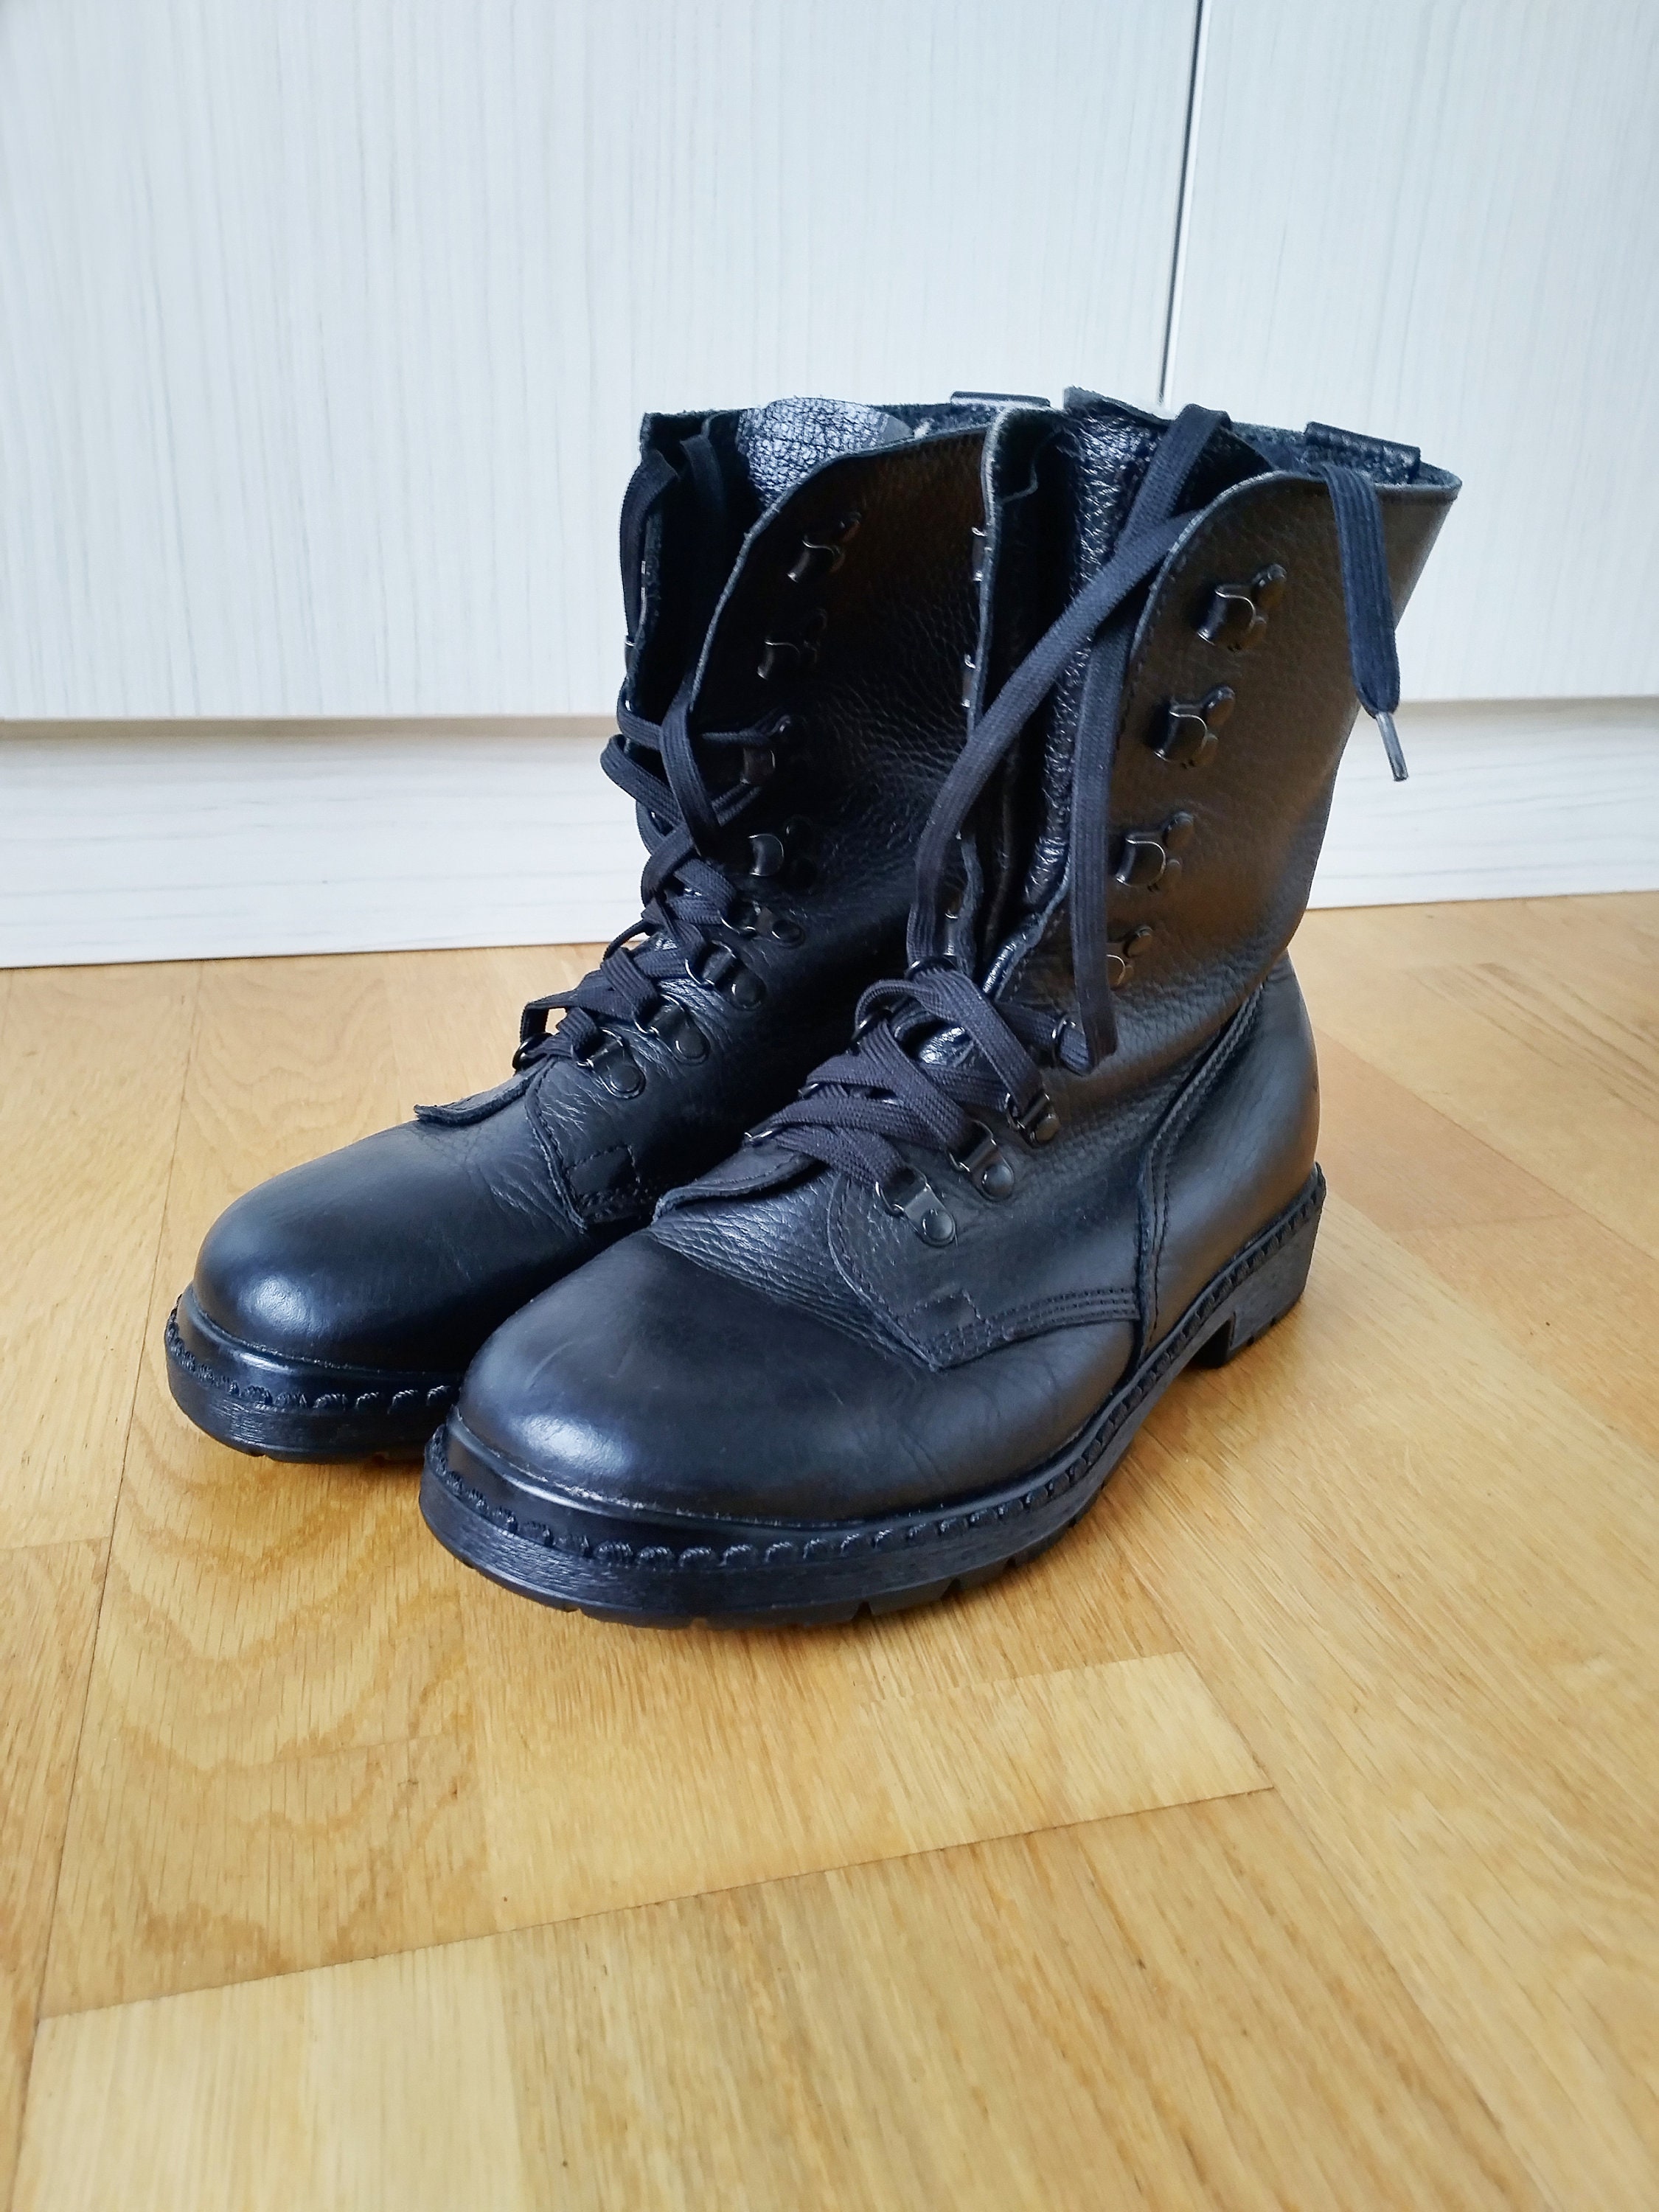 Boots Antistatisch Small - Military Combat Etsy BENZINFEST U. OEL Boots Boots, Vintage Leather Size,oel-u